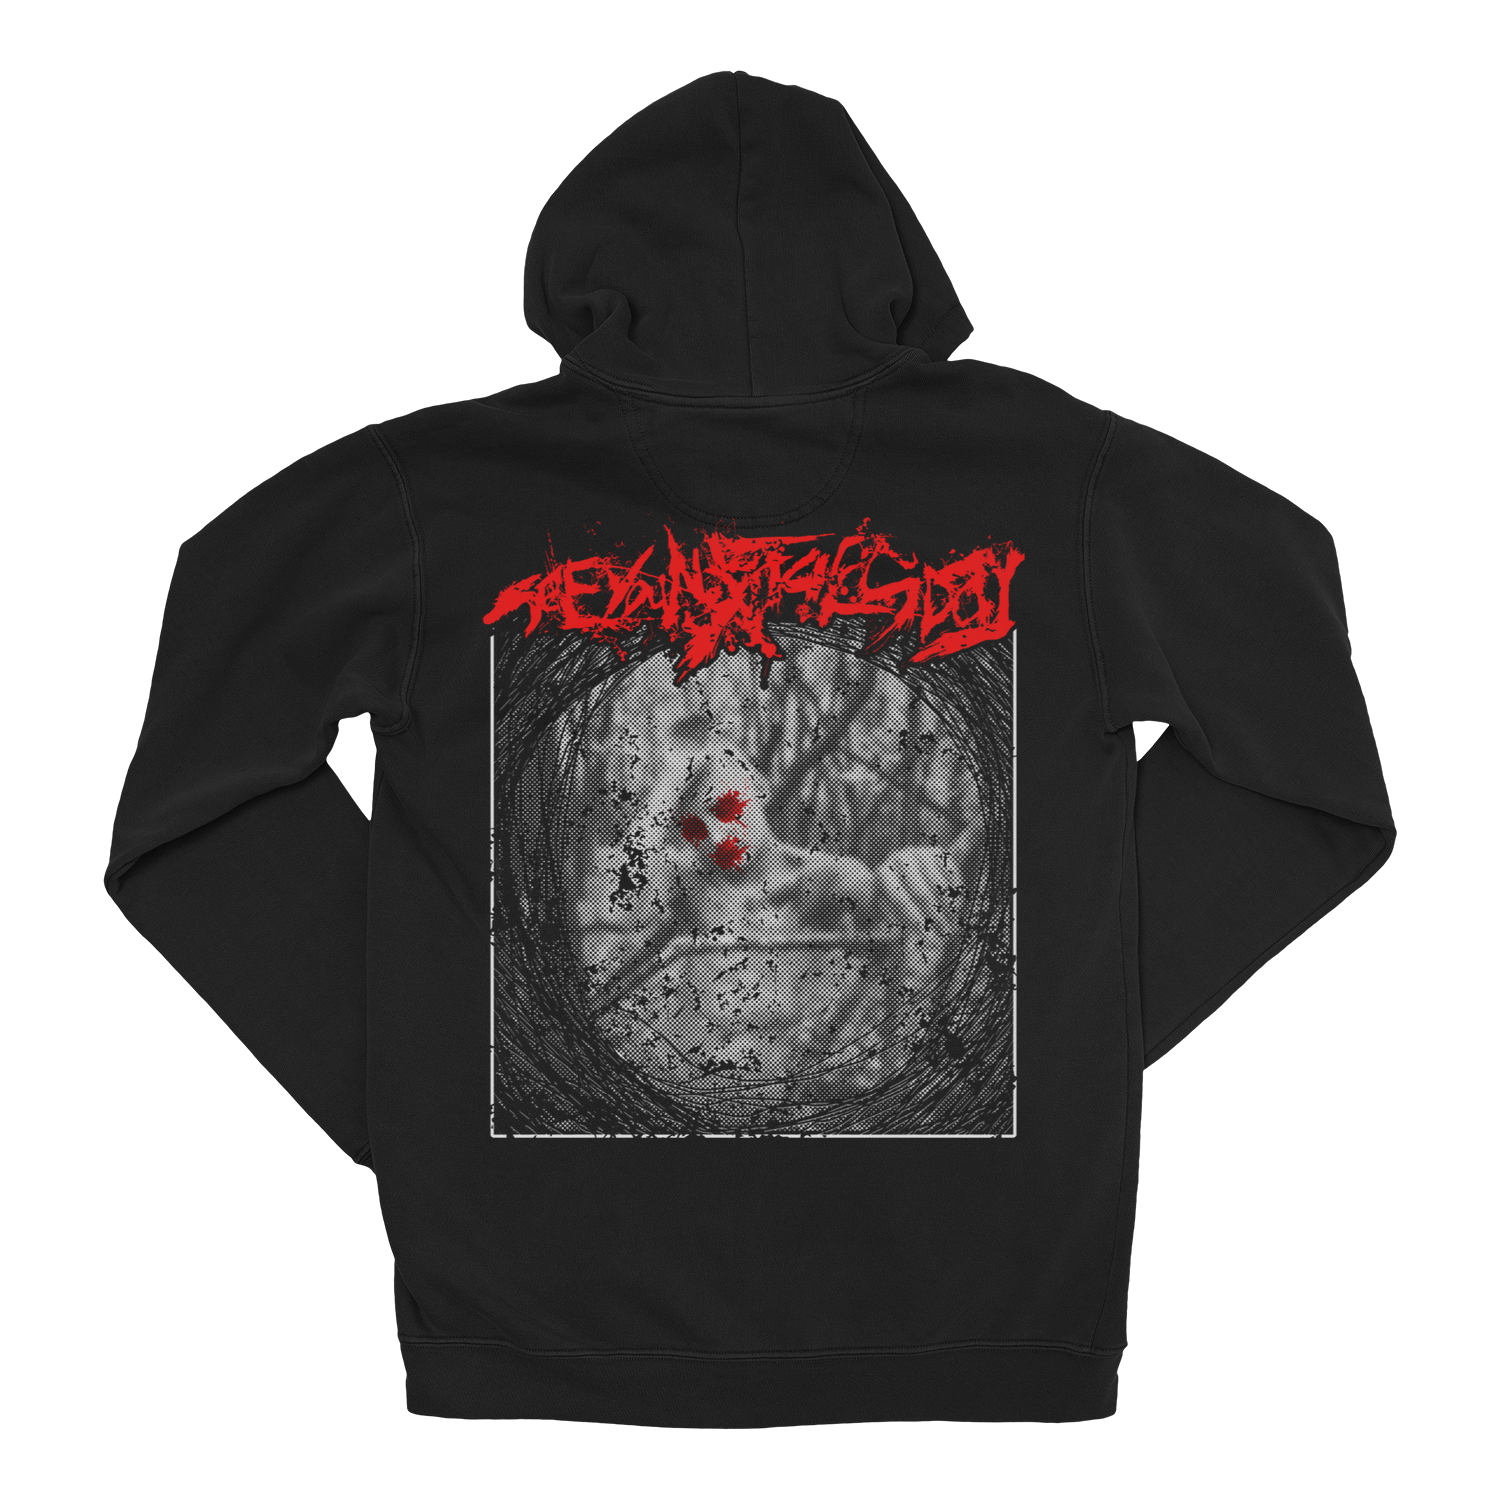 SEE YOU NEXT TUESDAY "Distractions" Black Hooded Sweatshirt